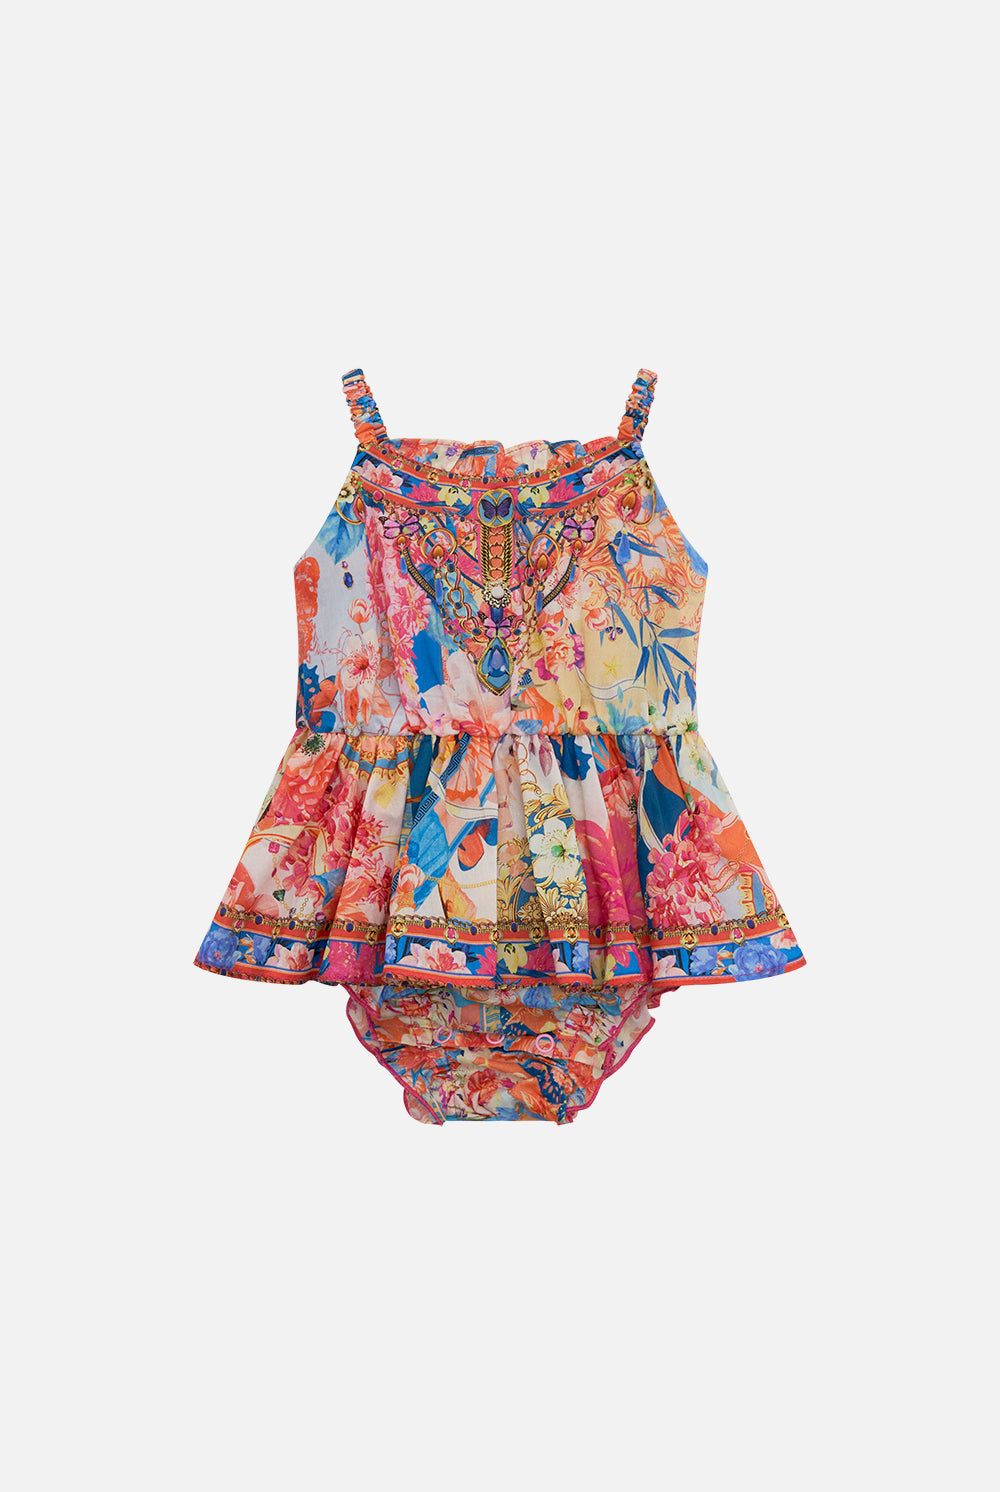 CAMILLA Babies Jumpdress - Meet Me in the Garden - CAMILLA - [product type] - Magpie Style